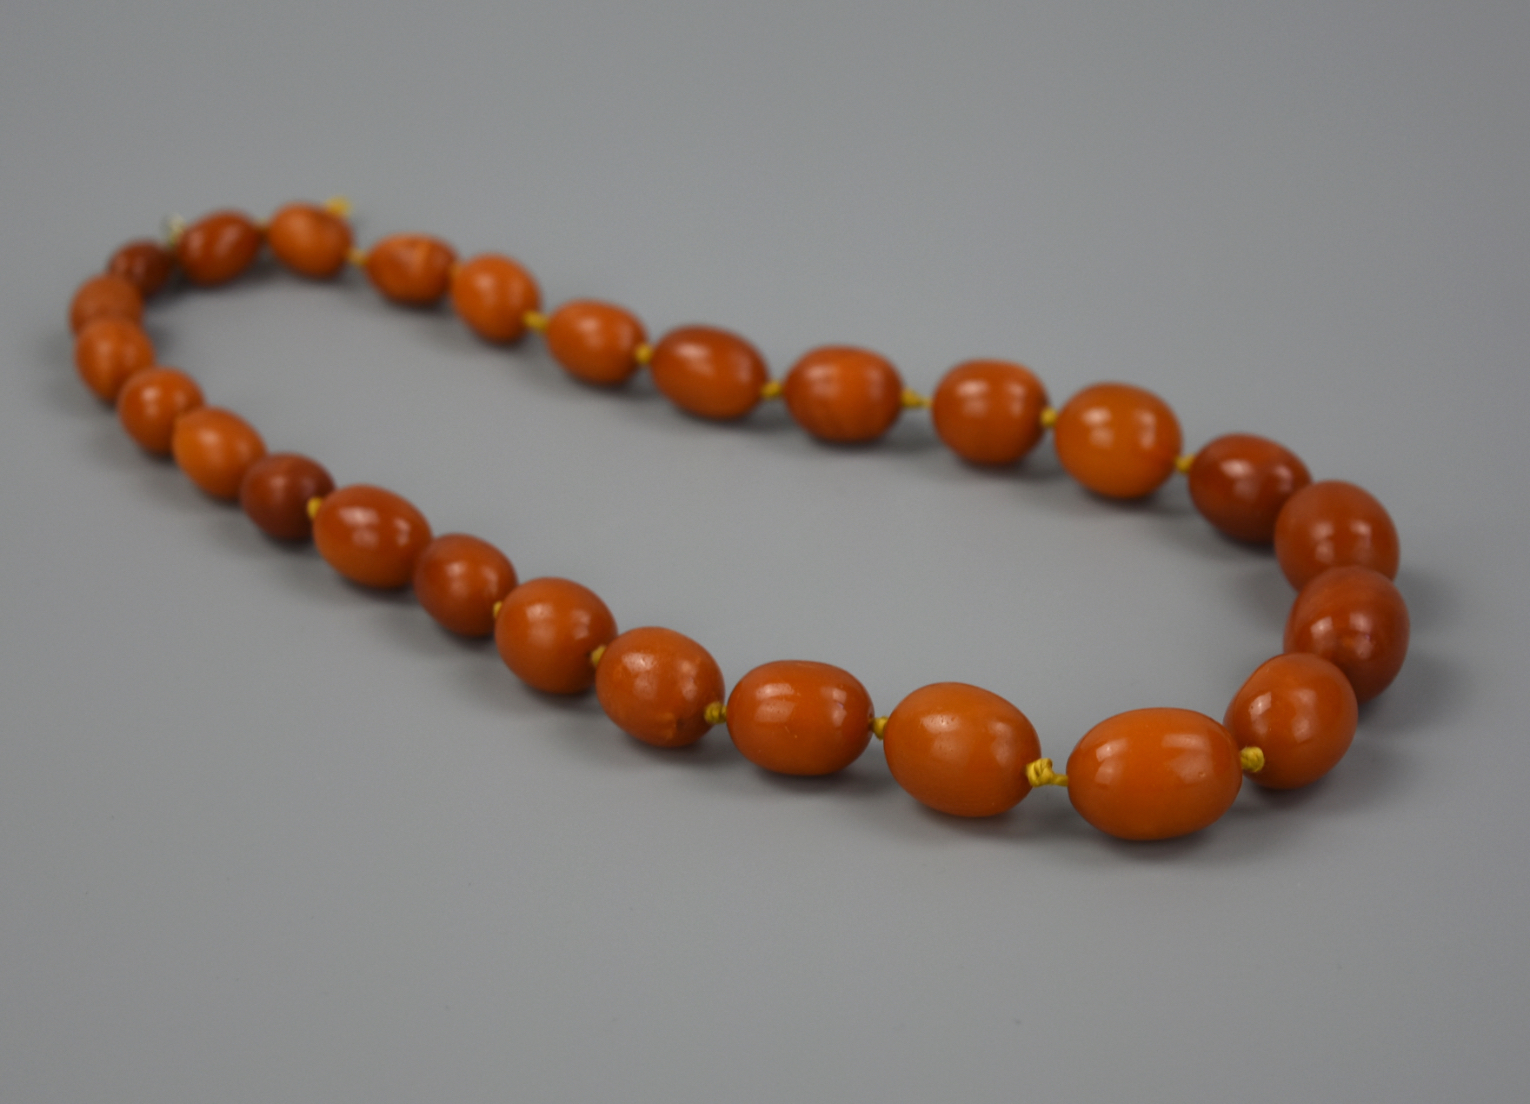 A CHINESE 27 BEED BEESWAX NECKLACE